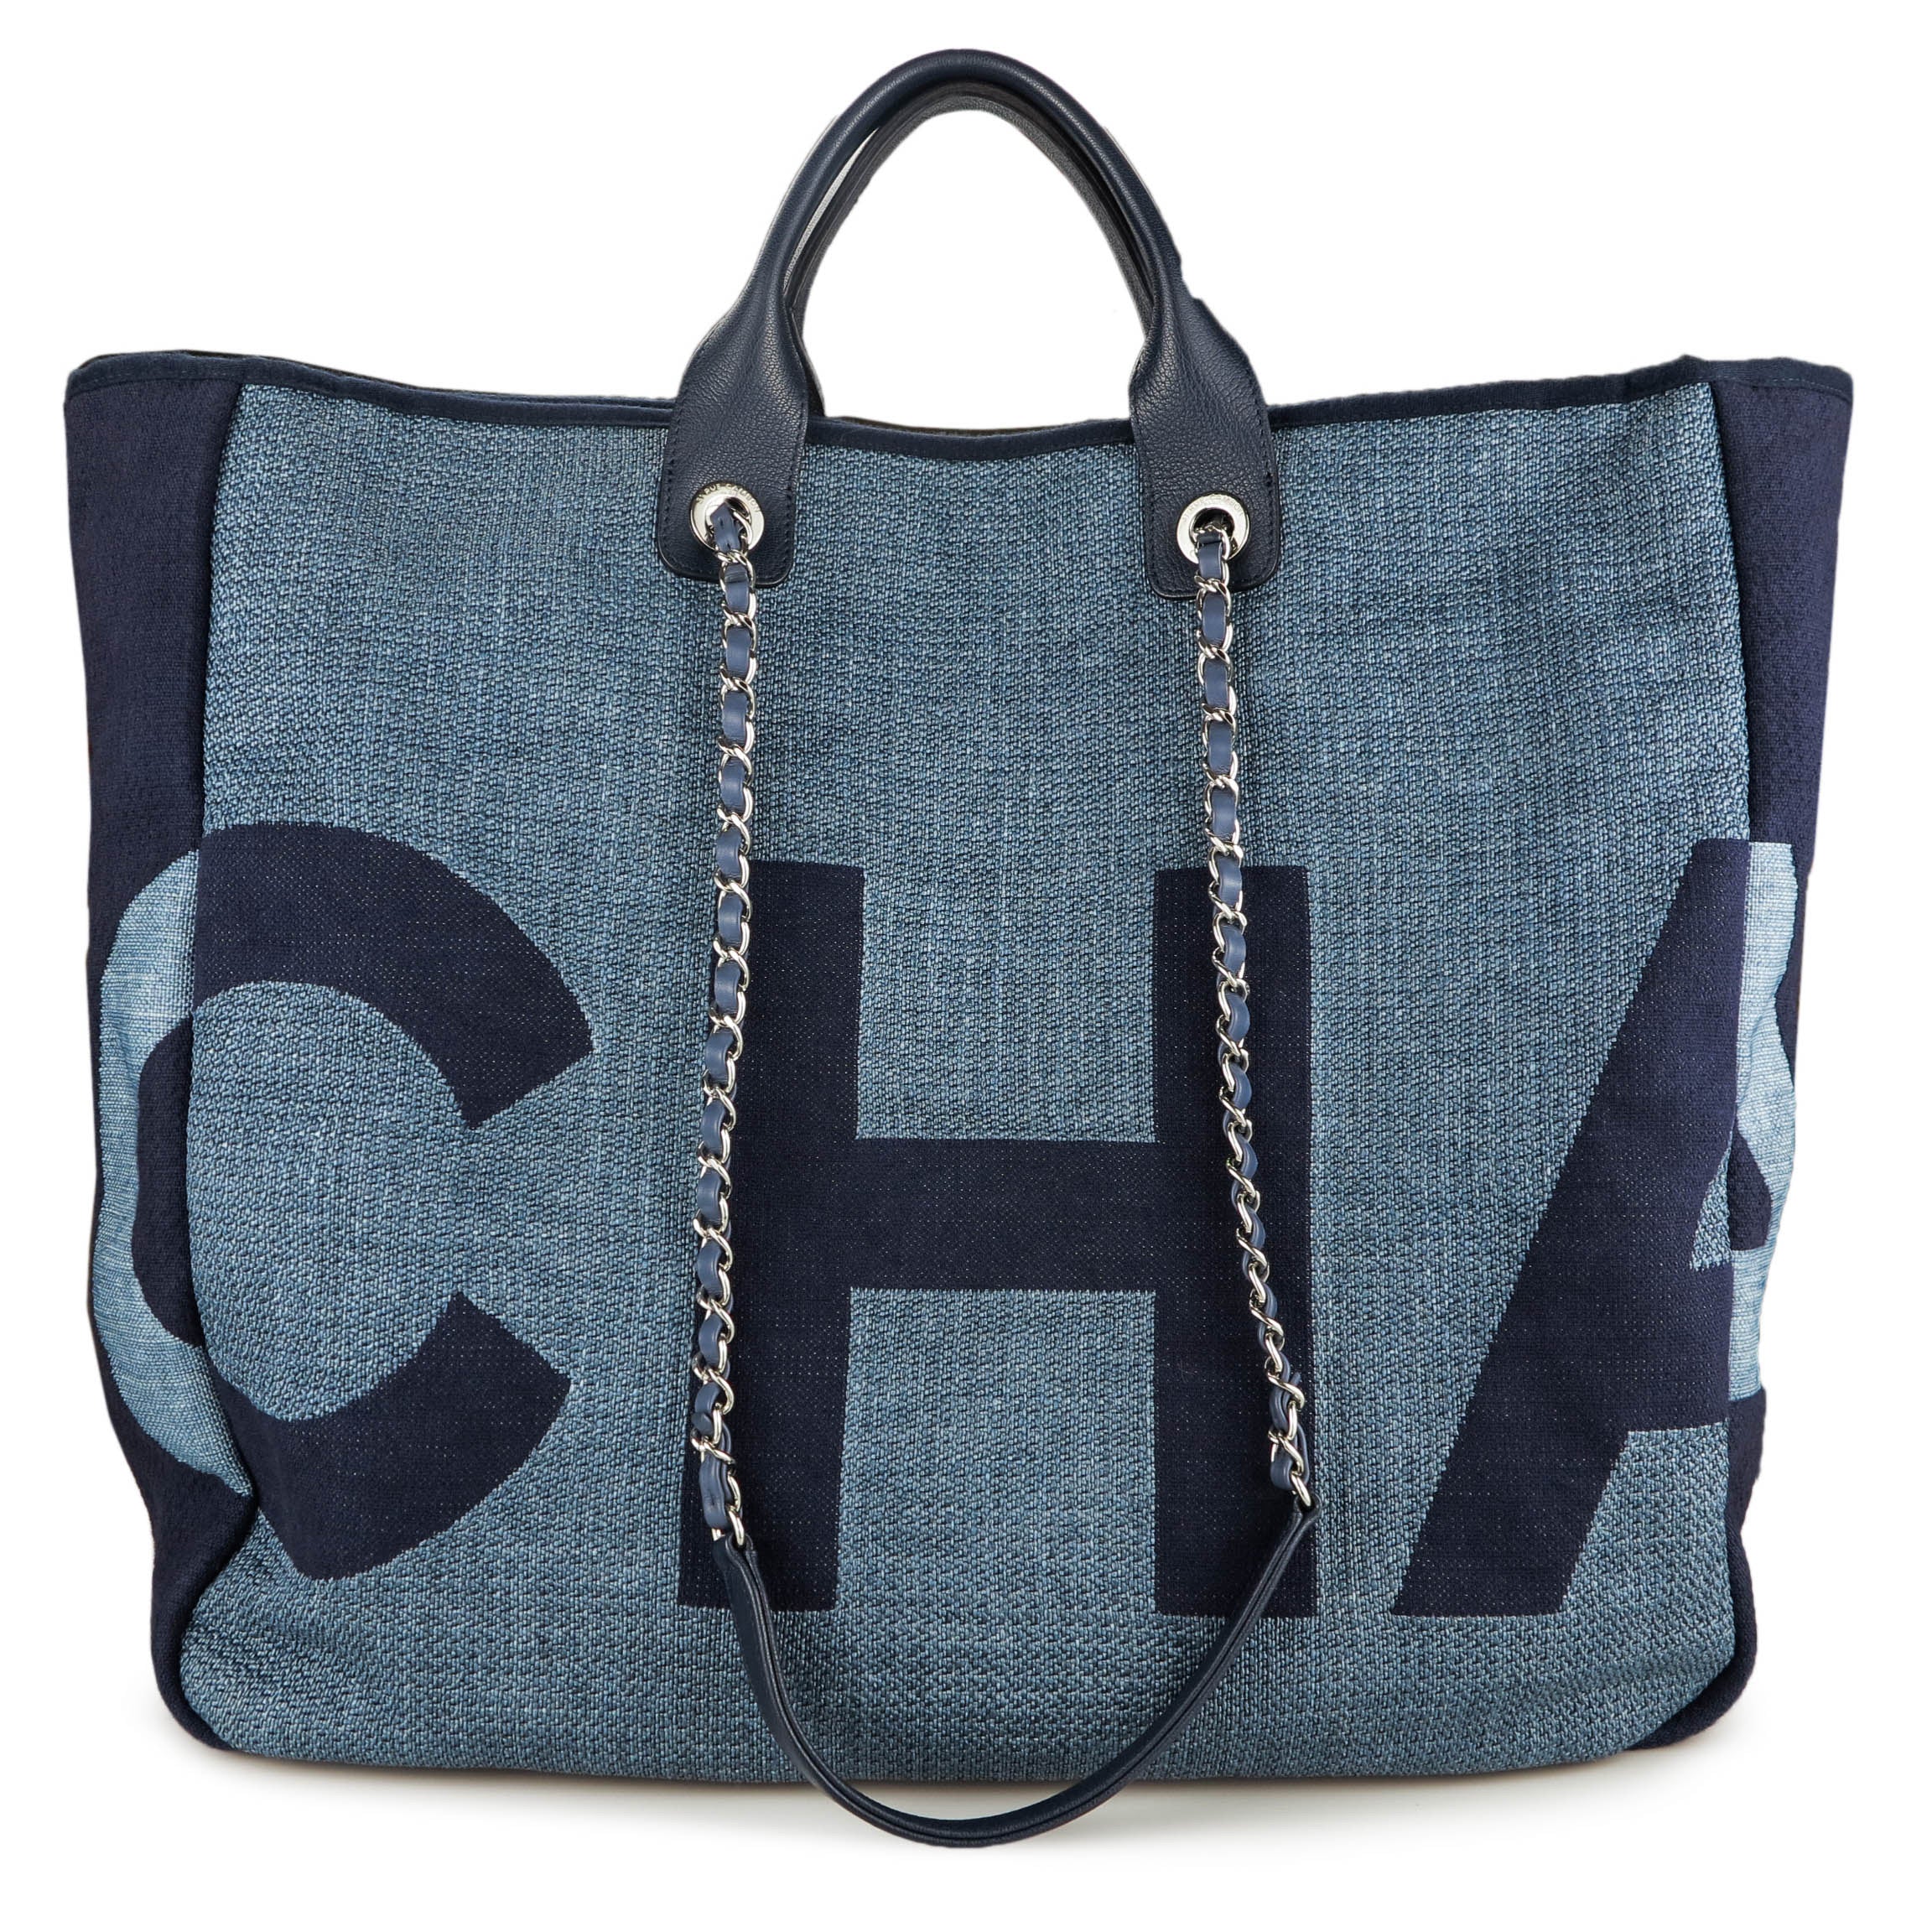 CHANEL CHA NEL Large Blue Canvas Deauville Shopping Tote